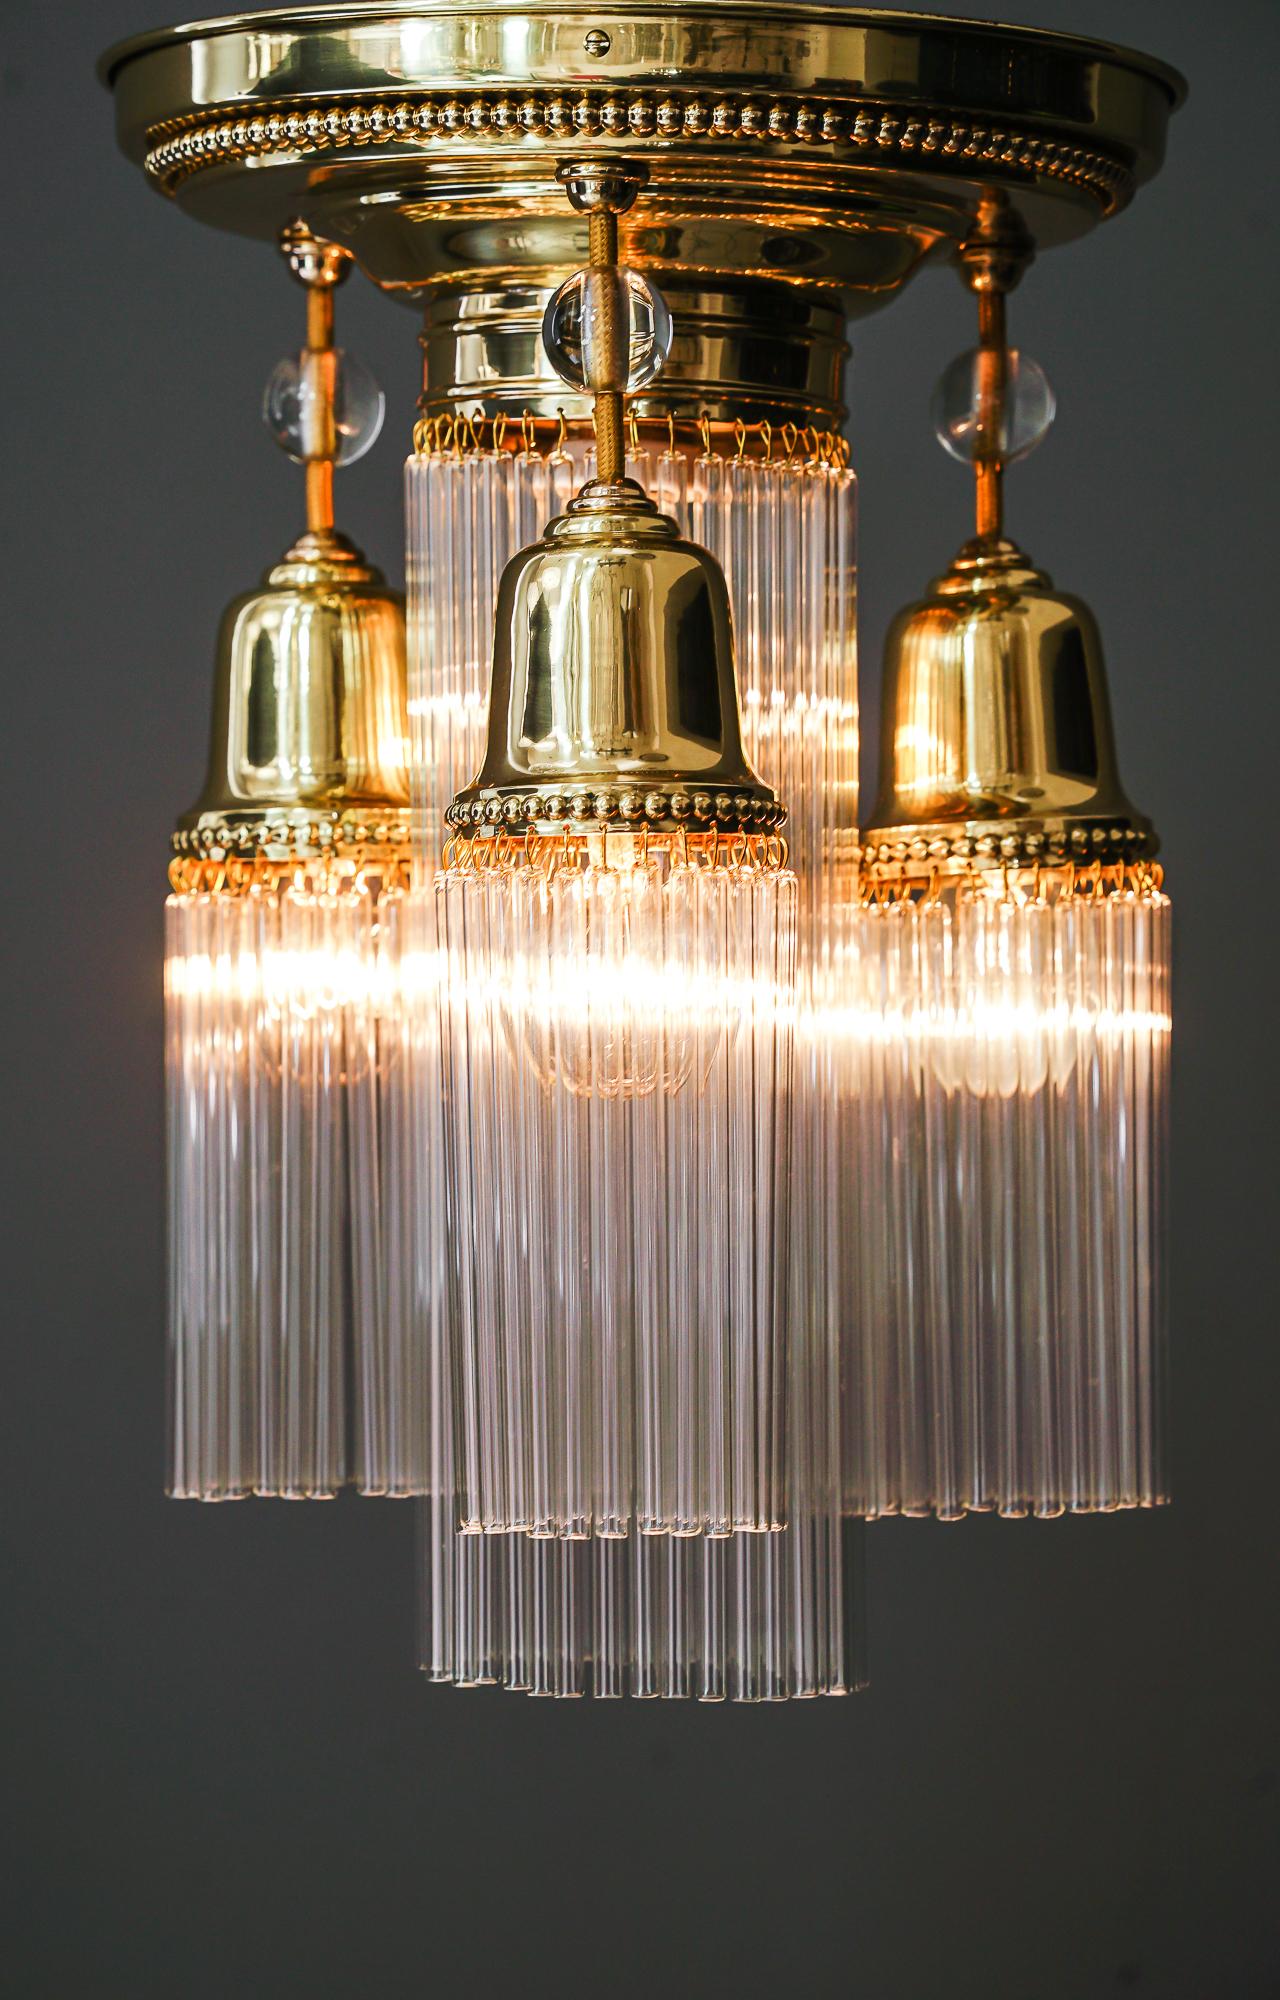 Art Deco ceiling lamp with glass sticks, Vienna, around 1920s.
Brass polished and stove enameled.
The glass sticks are replaced (new).